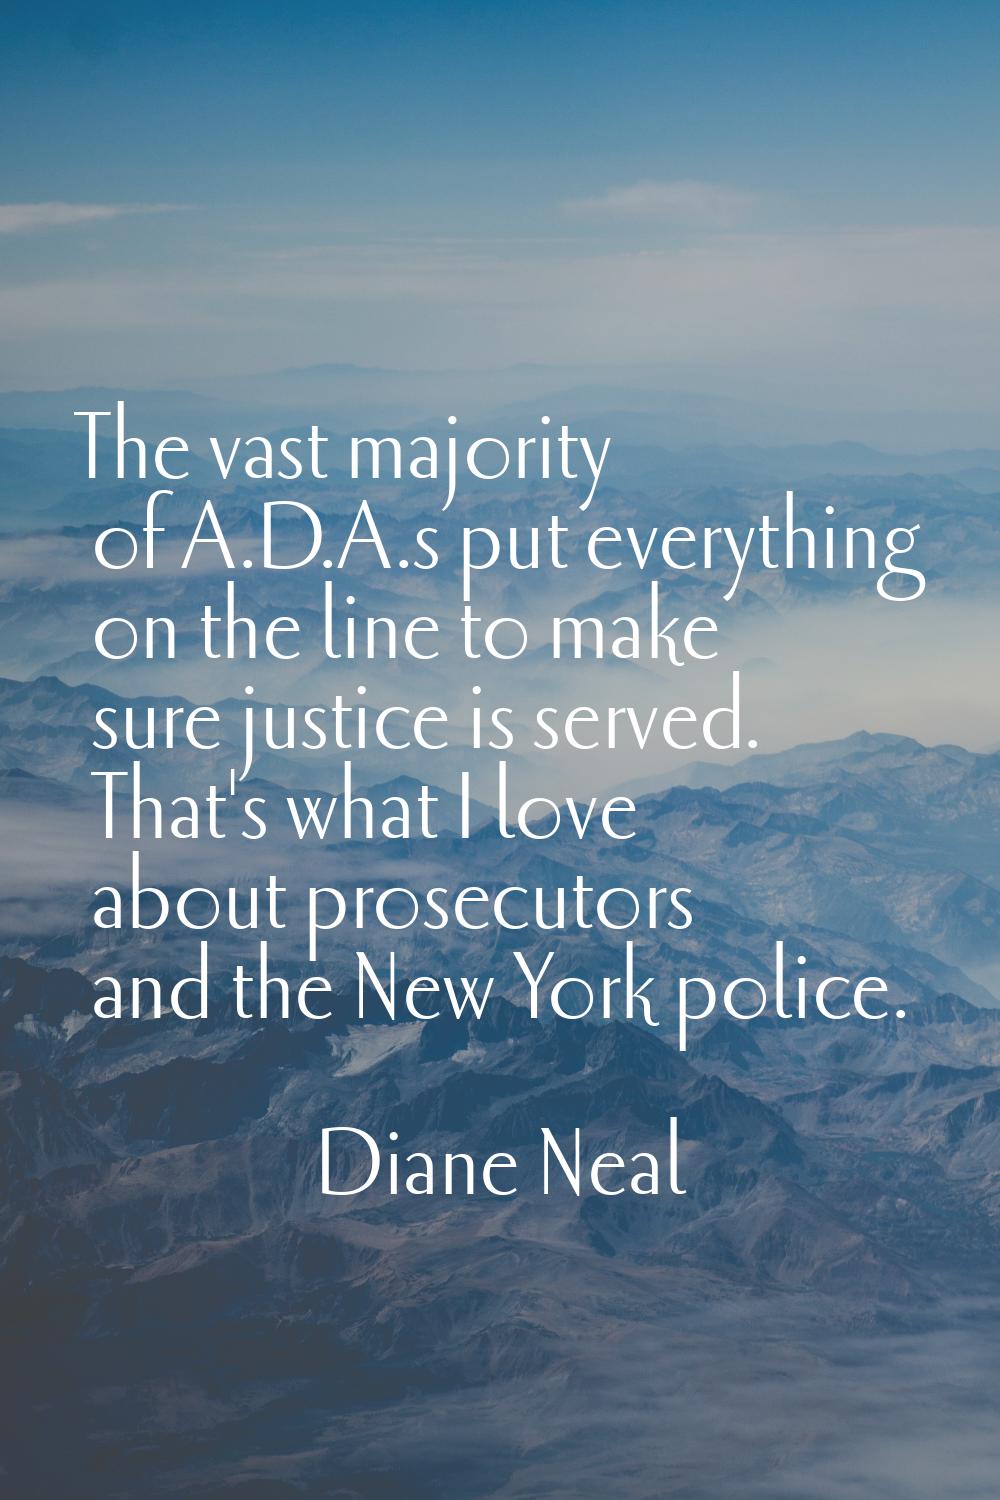 The vast majority of A.D.A.s put everything on the line to make sure justice is served. That's what